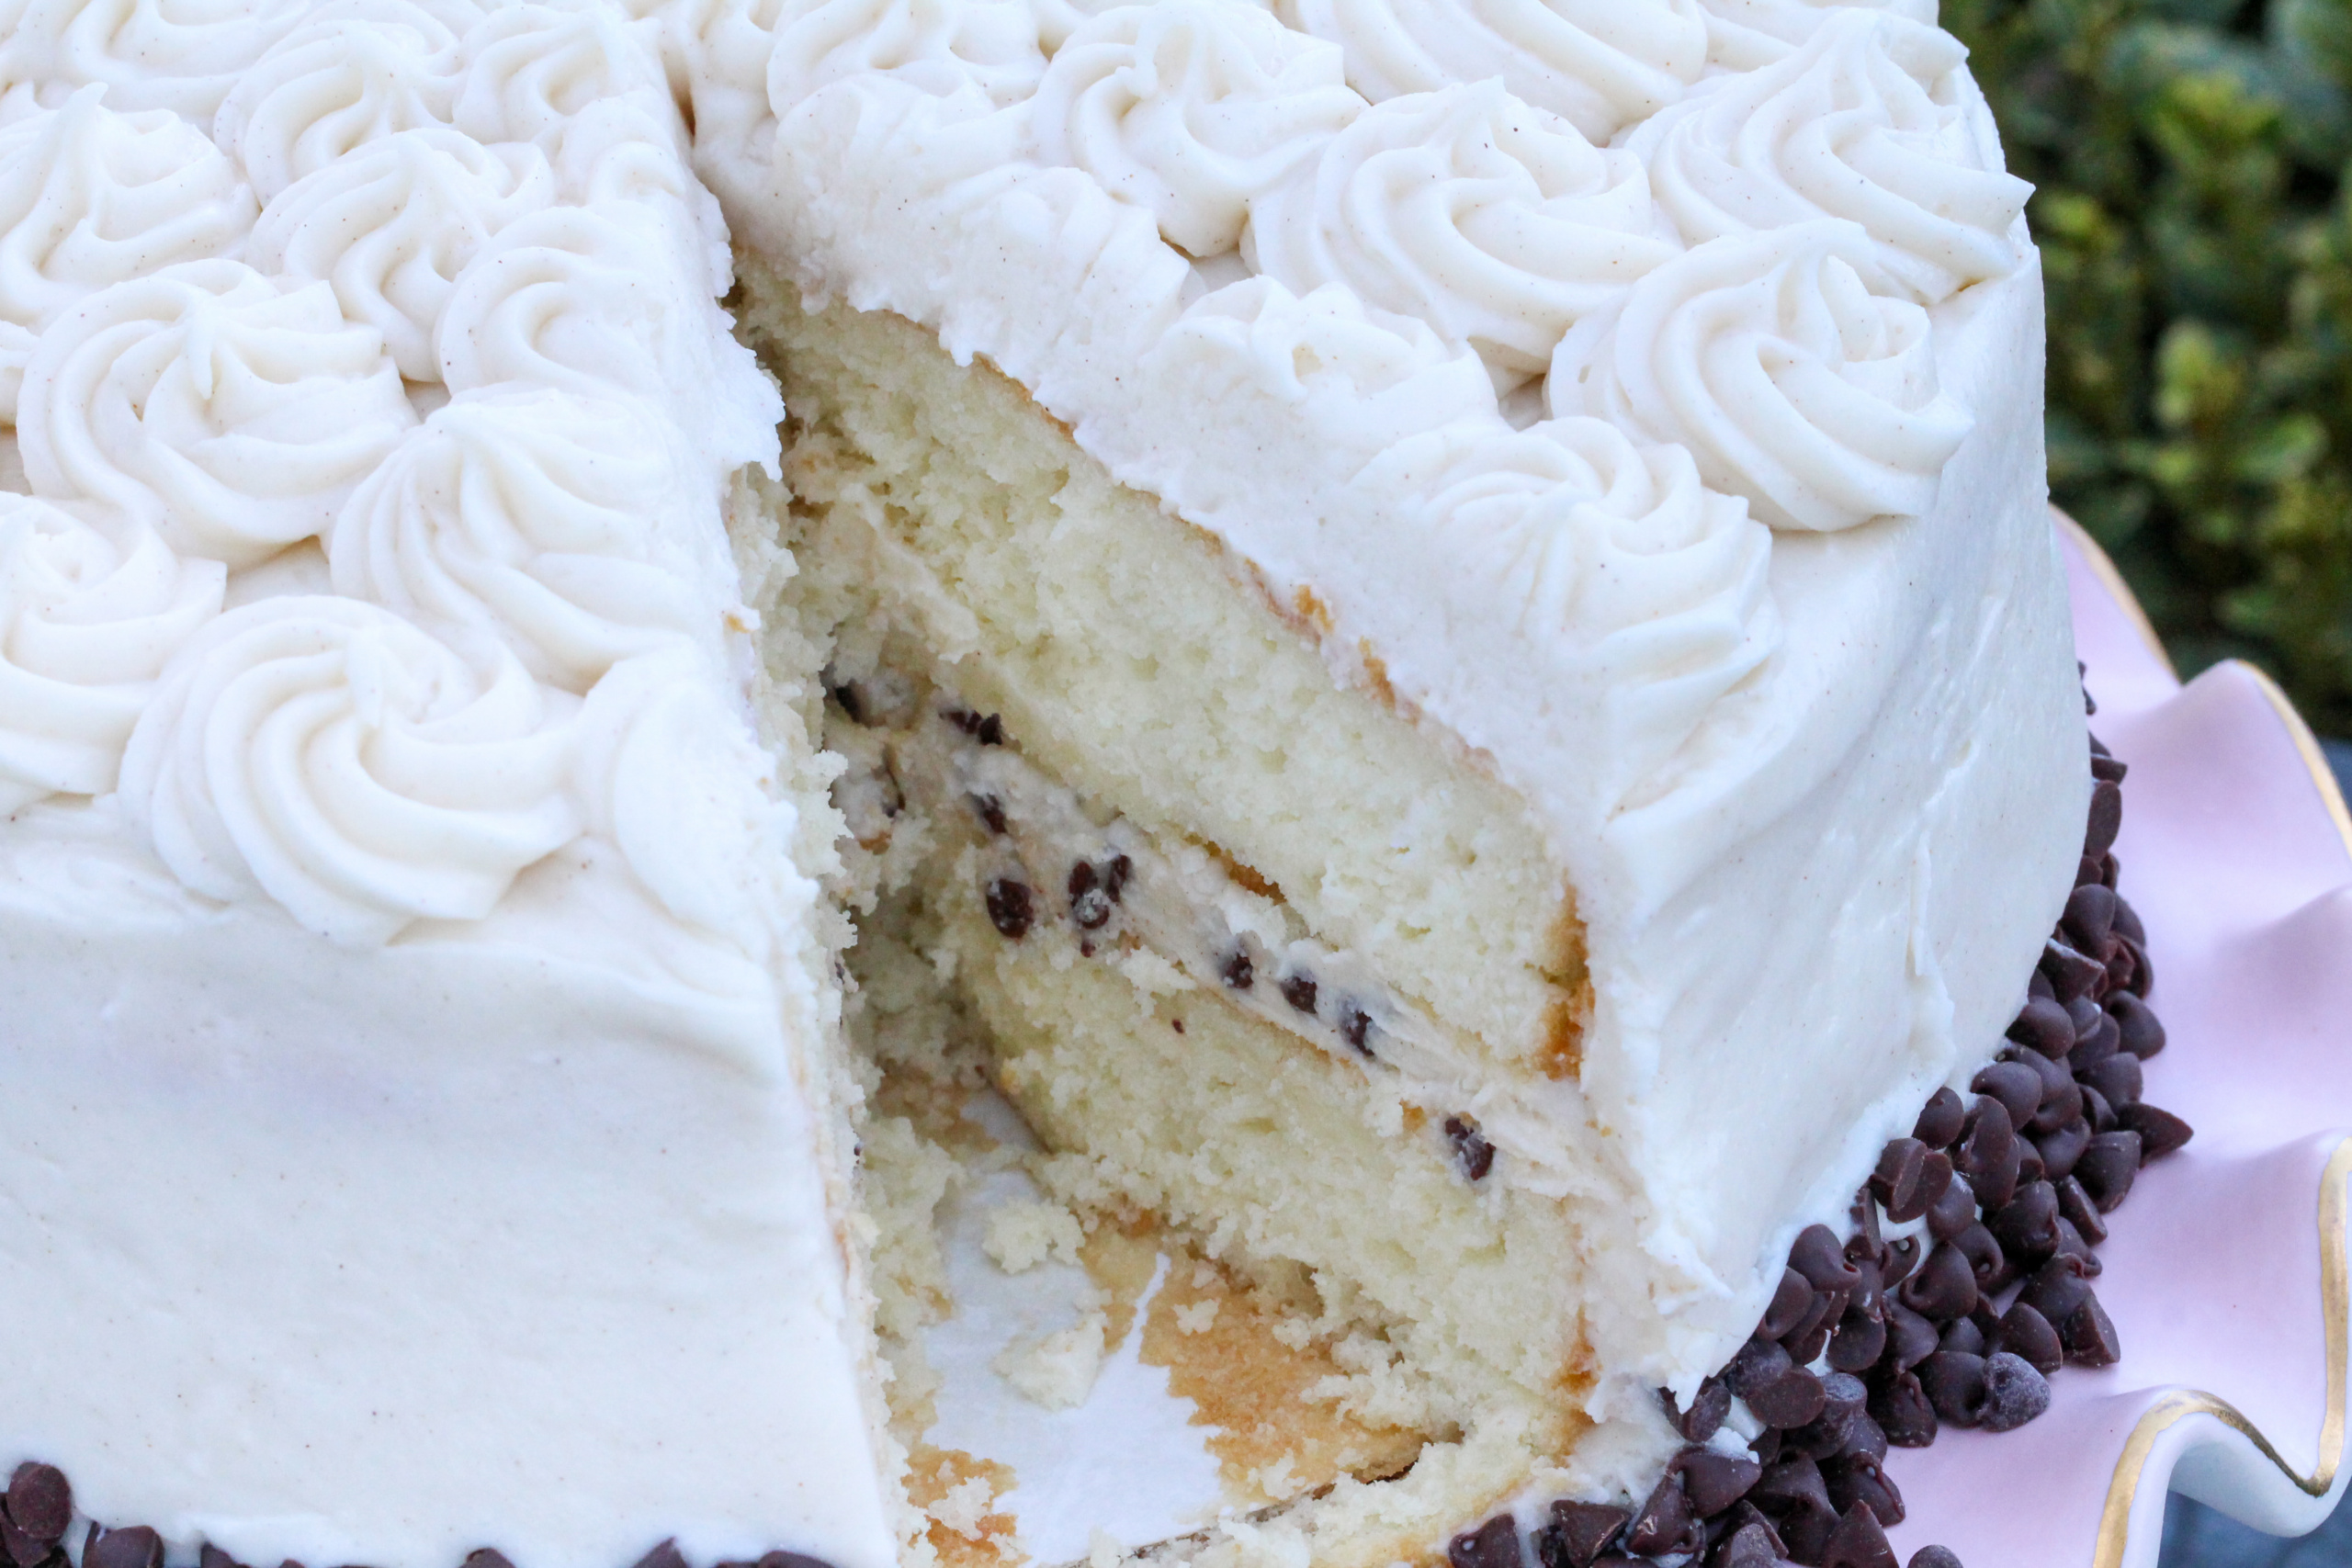 Cannoli Cake starts with a simple boxed cake mix but when paired with the combination of rich ricotta, mascarpone cheese, cream cheese, and chocolate chips in the luscious filling and frosting, the results are spectacularly decadent! Recipe shared with permission granted by Maria DiRico, author of LONG ISLAND ICED TINA. 